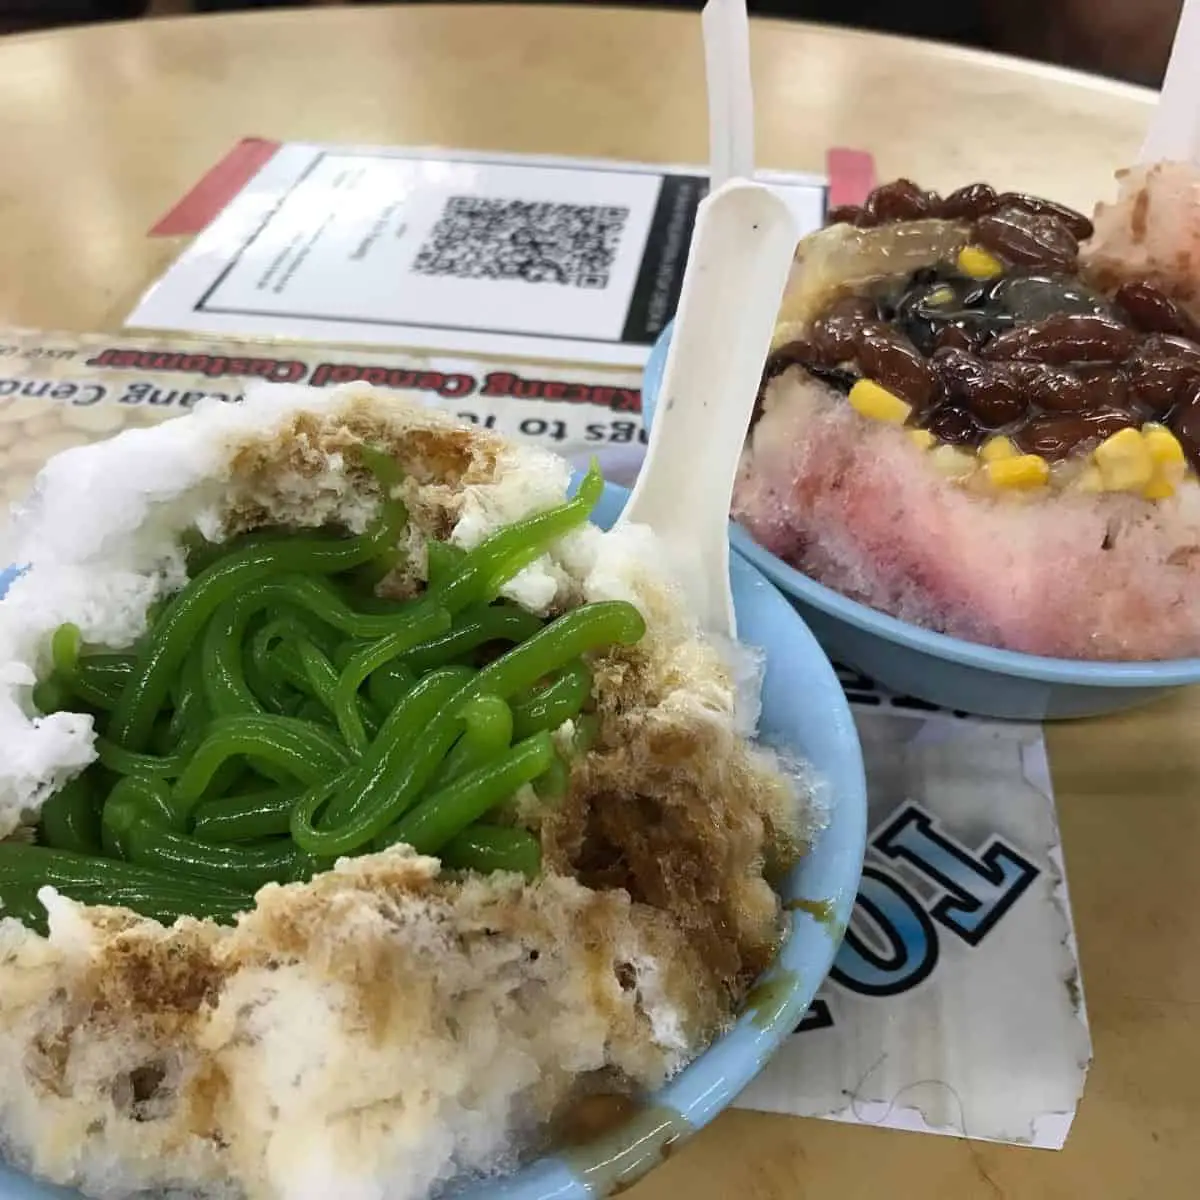 The famous dessert servings from Tony Ais Kacang in light blue bowls